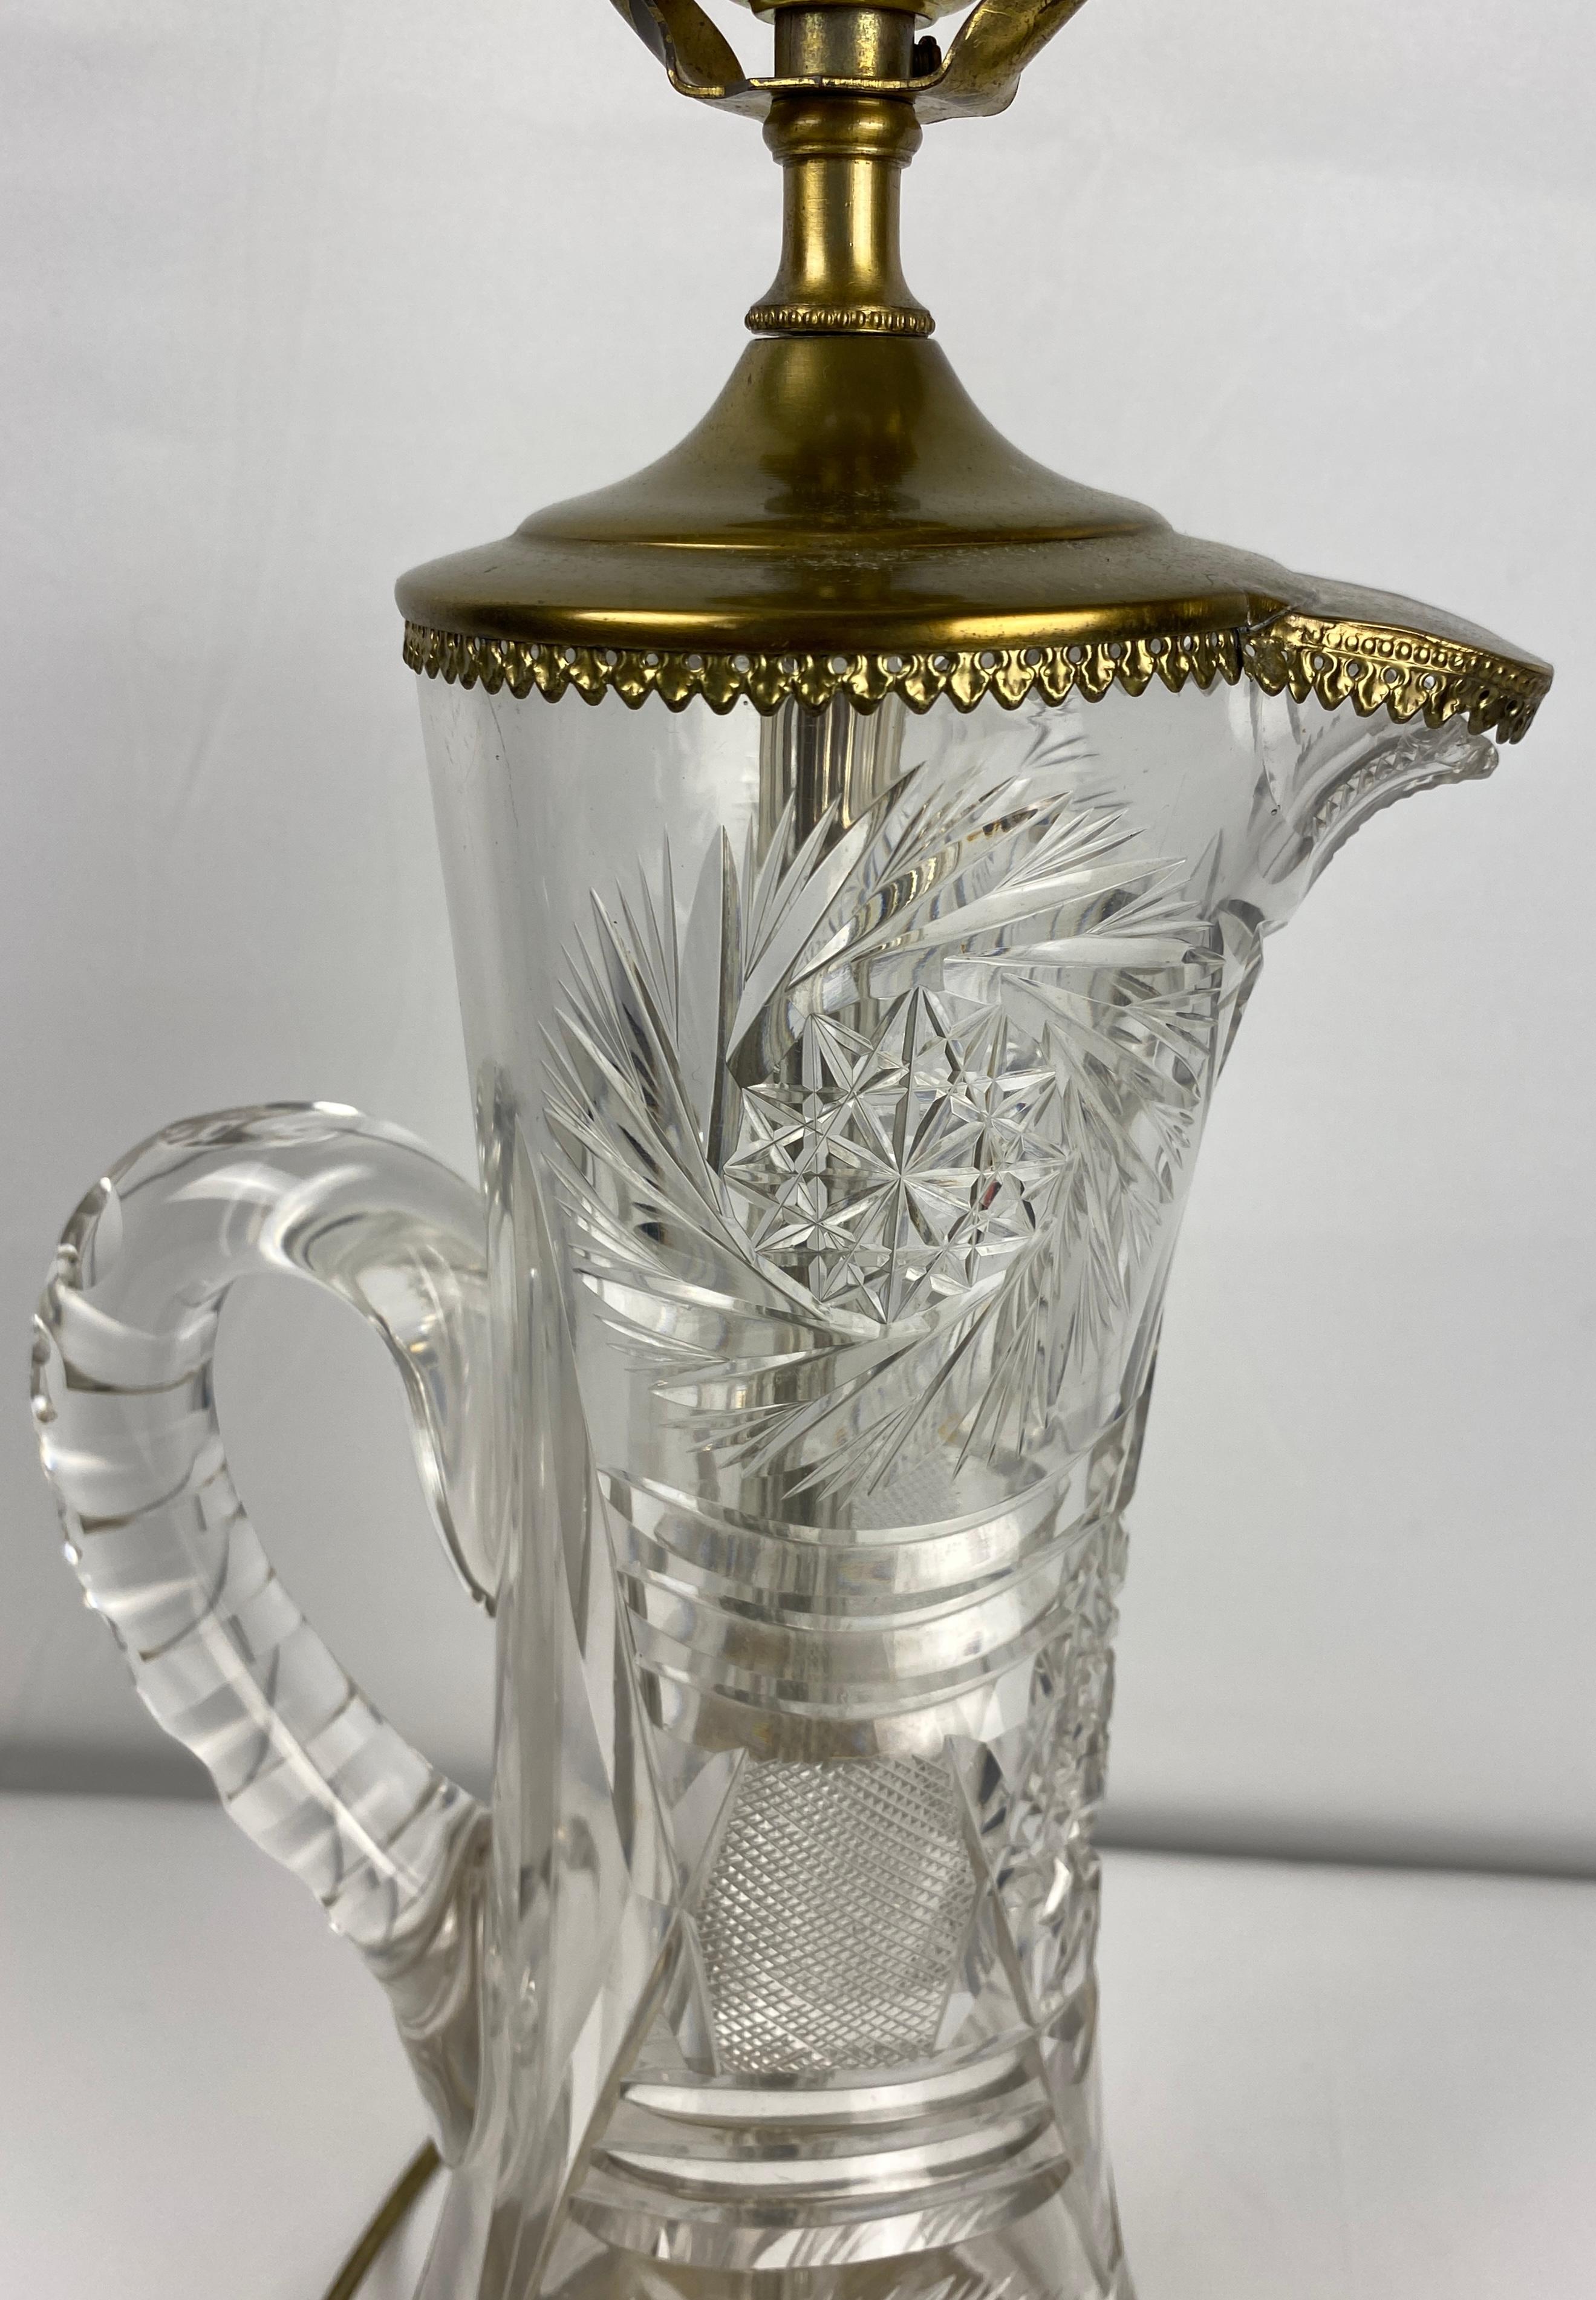 A fine quality crystal table lamp attributed to Waterford Crystal. 

This crystal table lamp was modified from a pitcher vase and embodies features from the modern Brodey pattern, decorated with artisan cuts in the shape of palm leaves then set on a